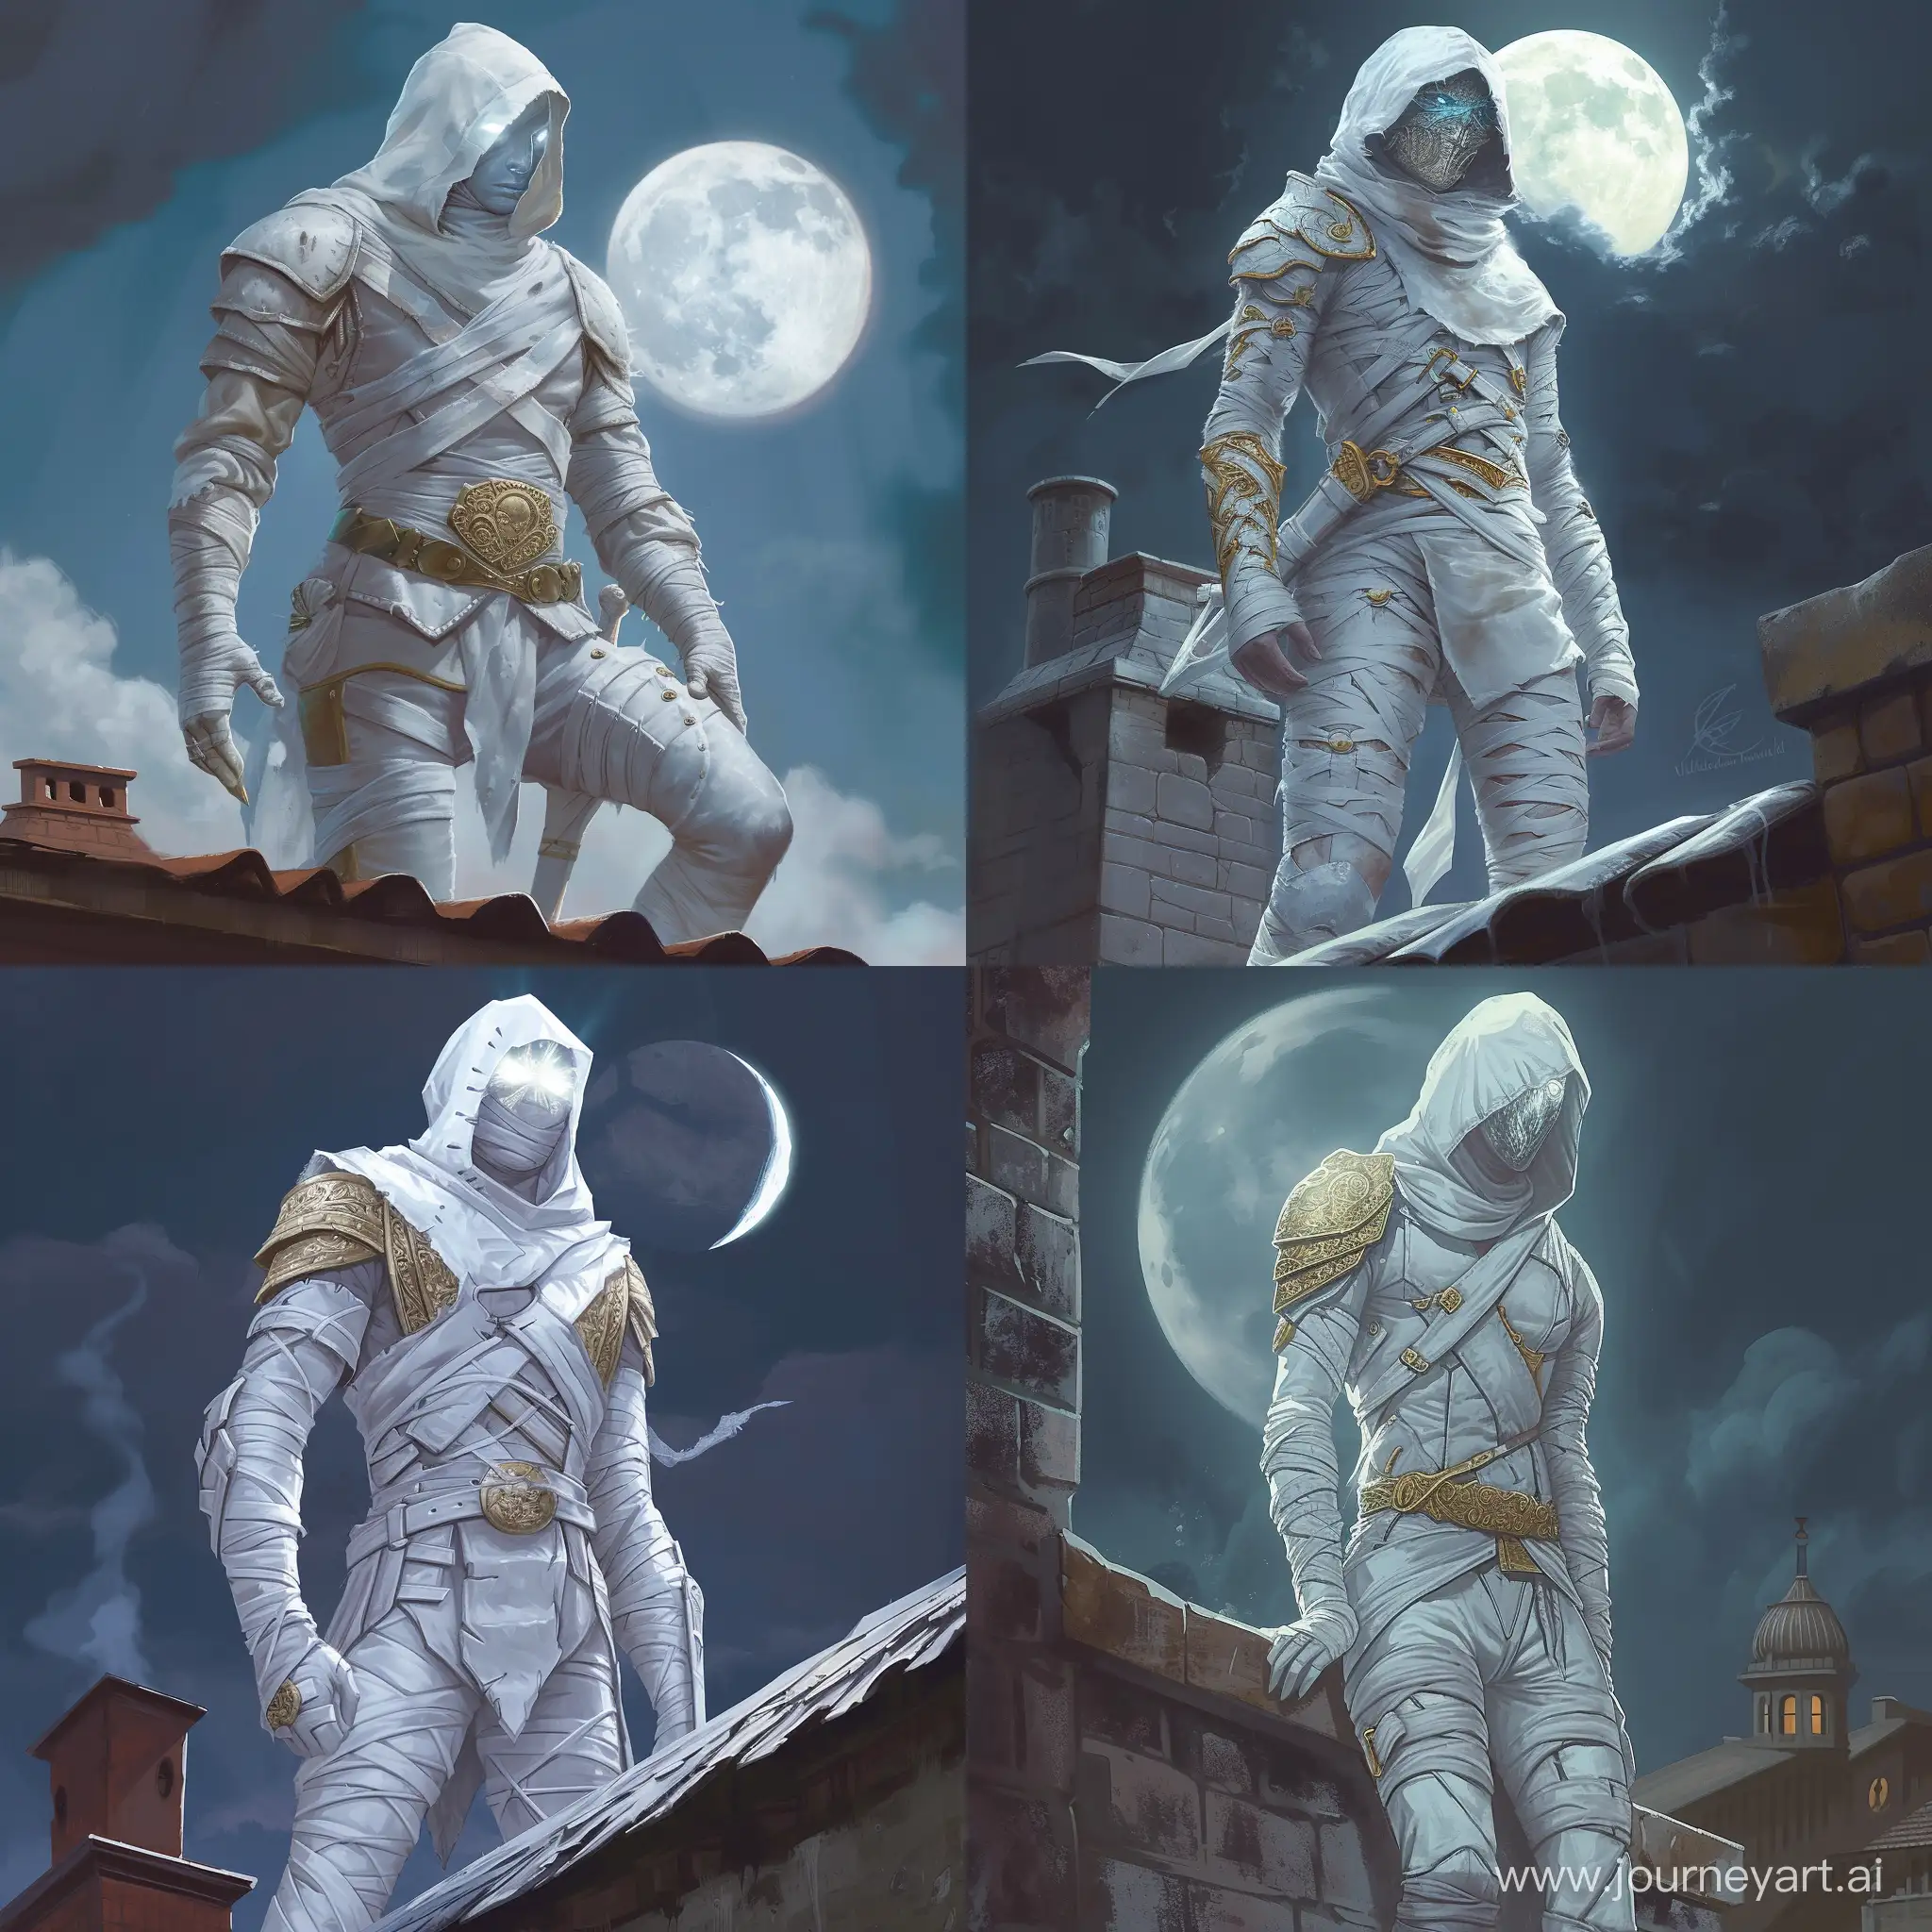 Draw a character from the Dungeons and Dragons universe according to the following description: He is a 30 years old male changeling dressed in white leather armor sparingly ornated with pale gold. He has mummy-like bandages on his arms, legs and his waist. His head is covered with a white hood, and his mouth is covered with an ornate rogue mask, his eyes are shimmering with white light. His skin is light grey, almost white like ash. He is watching from the rooftop, with a full moon on the background